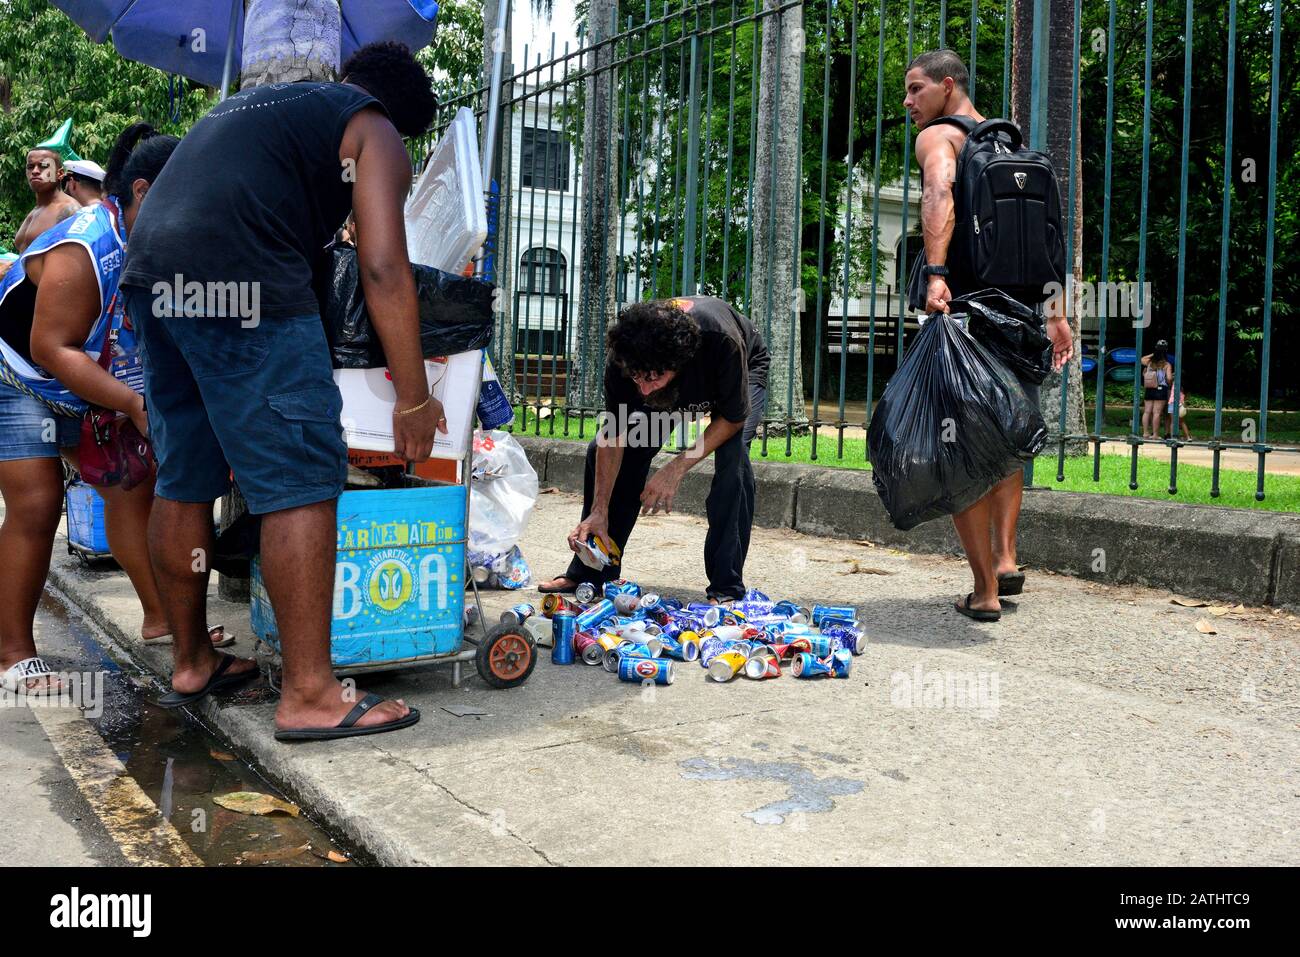 Street Carnival, Americas, Brazil - February 17, 2019: A man was picking up discarded cans for recycling during a Carnival parade in Rio de Janeiro. Stock Photo